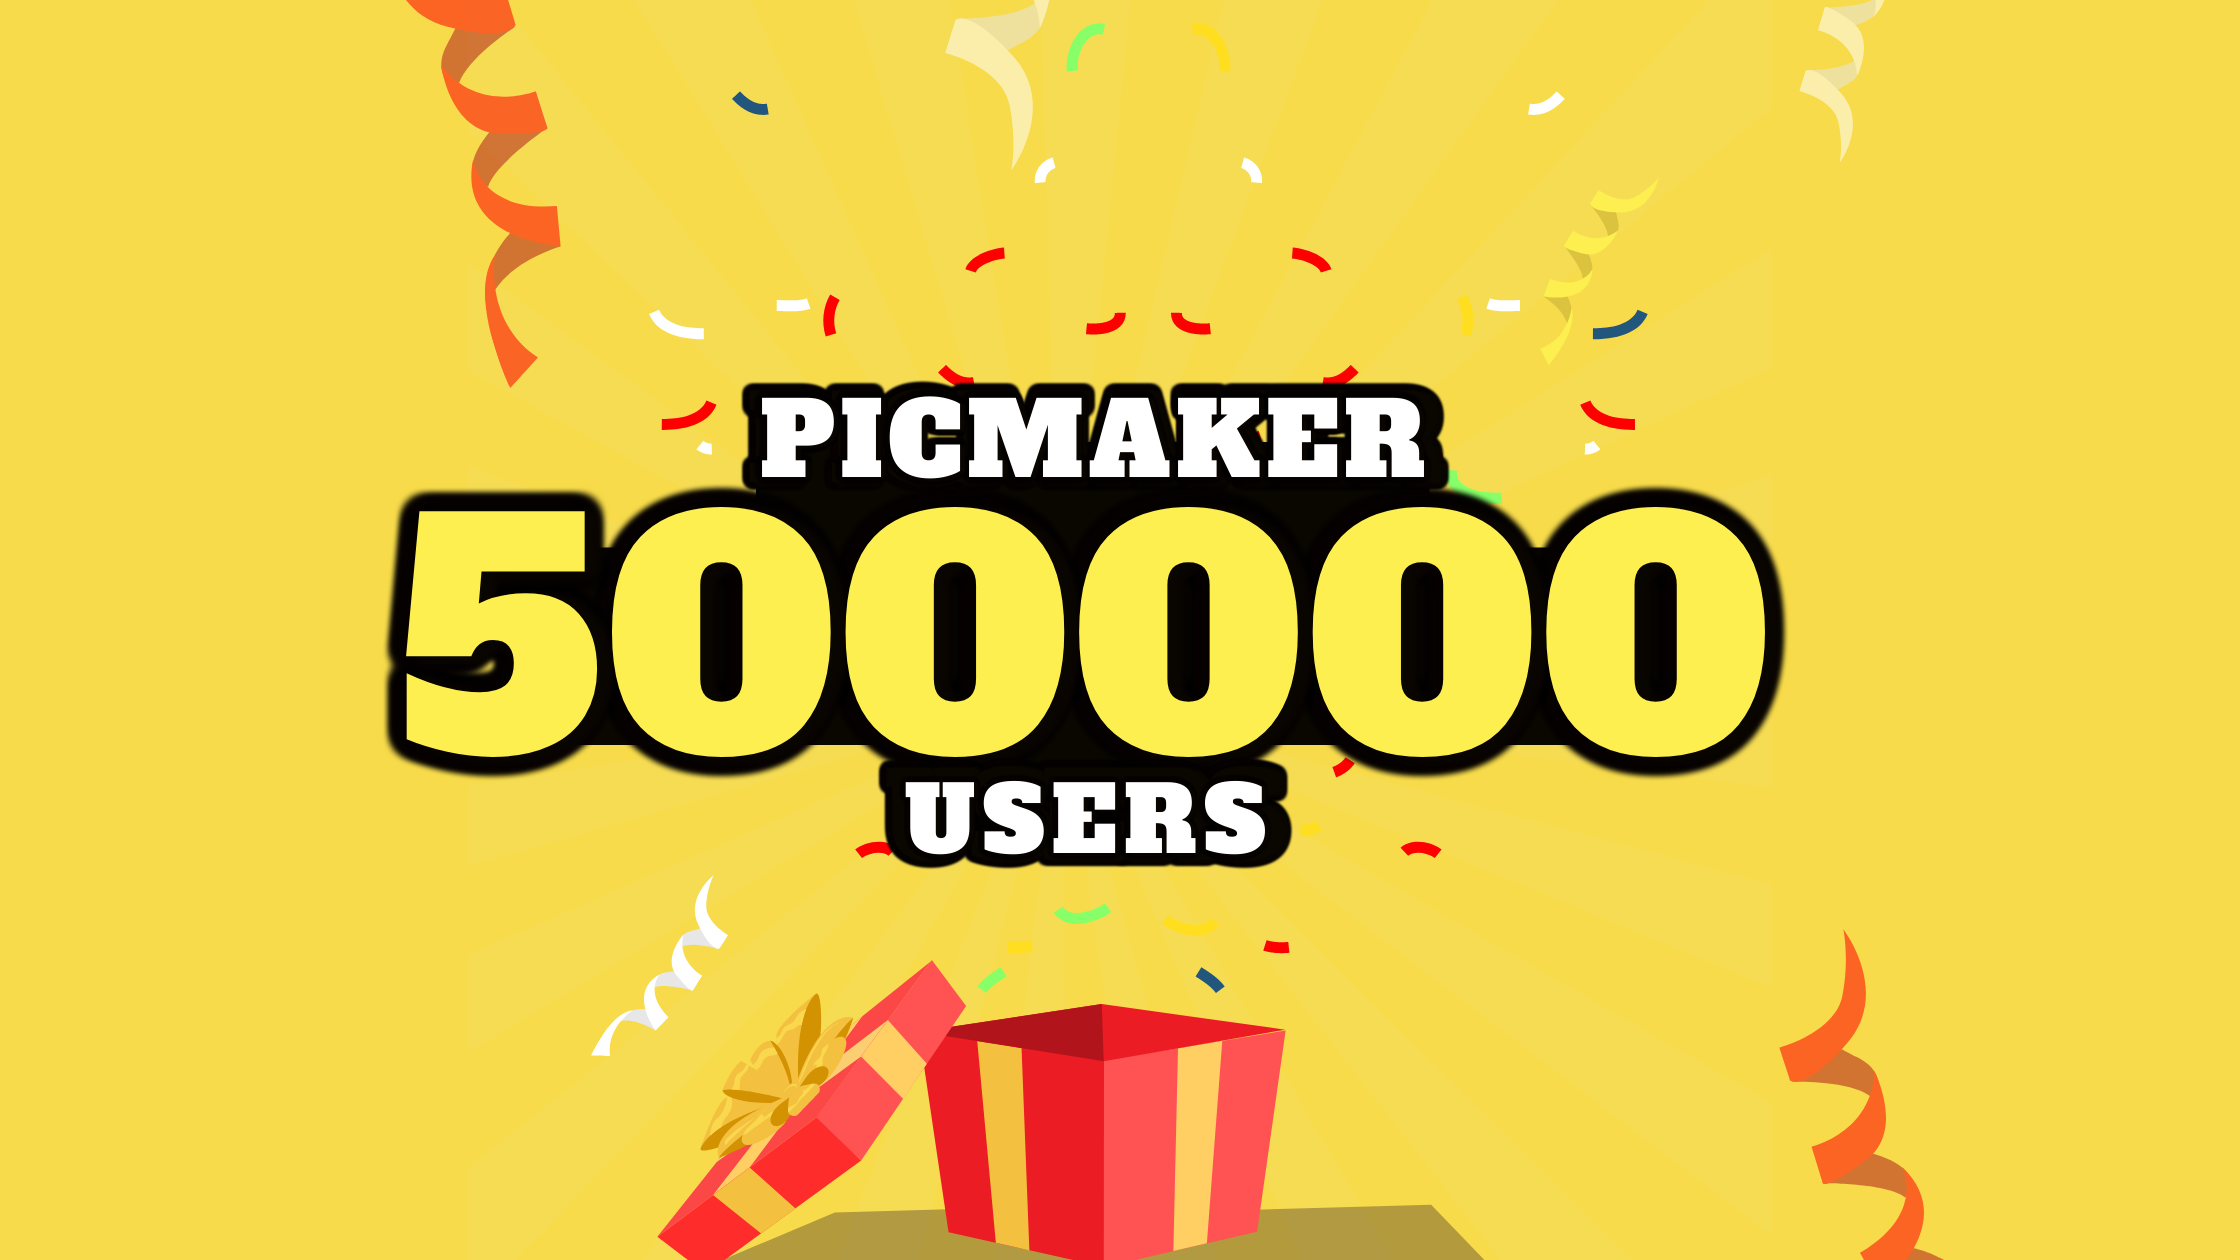 Picmaker users count